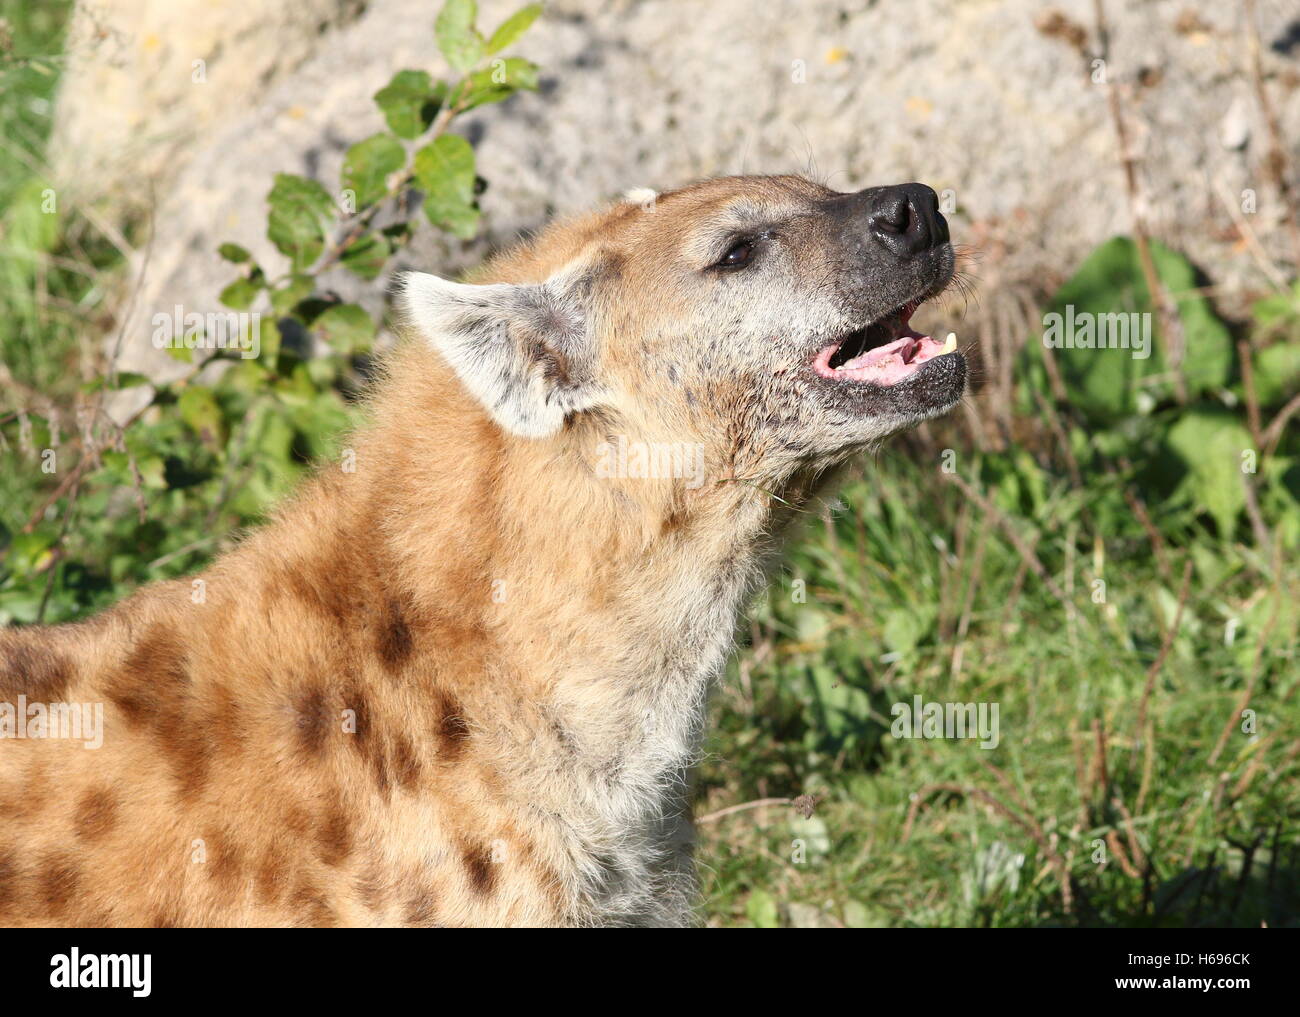 Growling African Spotted or laughing hyena (Crocuta crocuta) in close-up Stock Photo